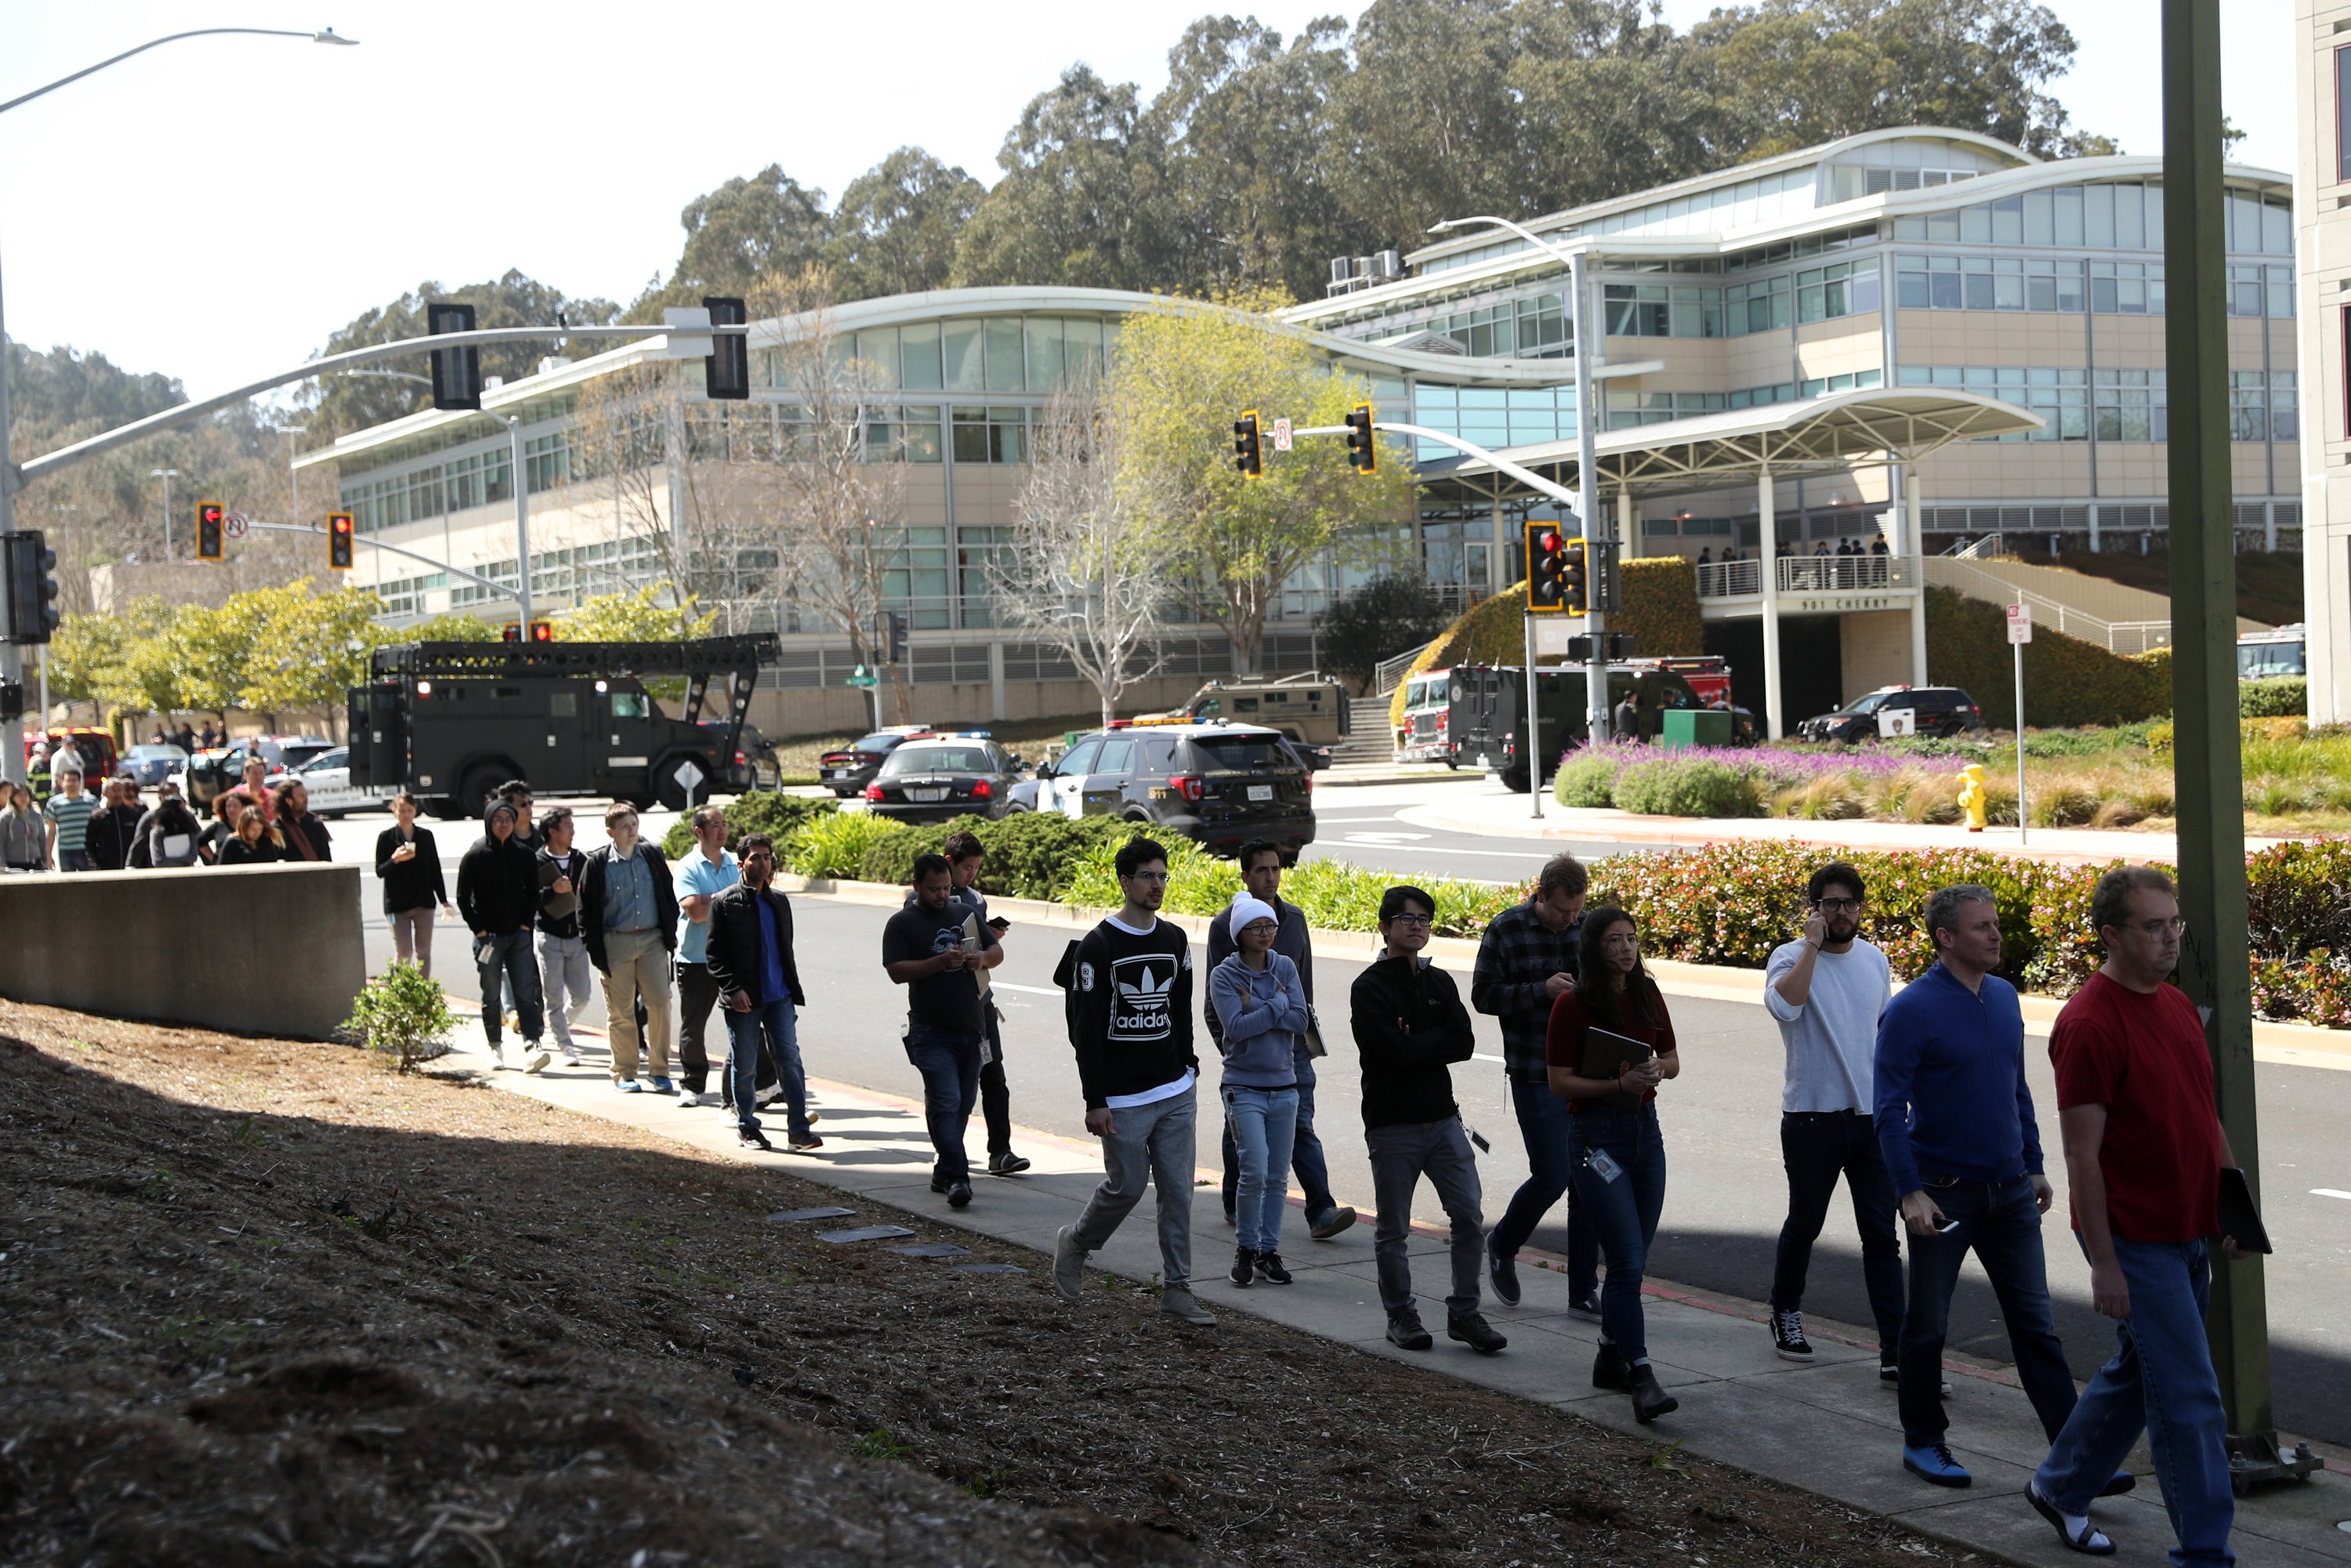 YouTube employees leave the scene after police responded to active shooter situation at YouTube facility in San Bruno. (Scott Strazzante—San Francisco Chronicle/Polaris)